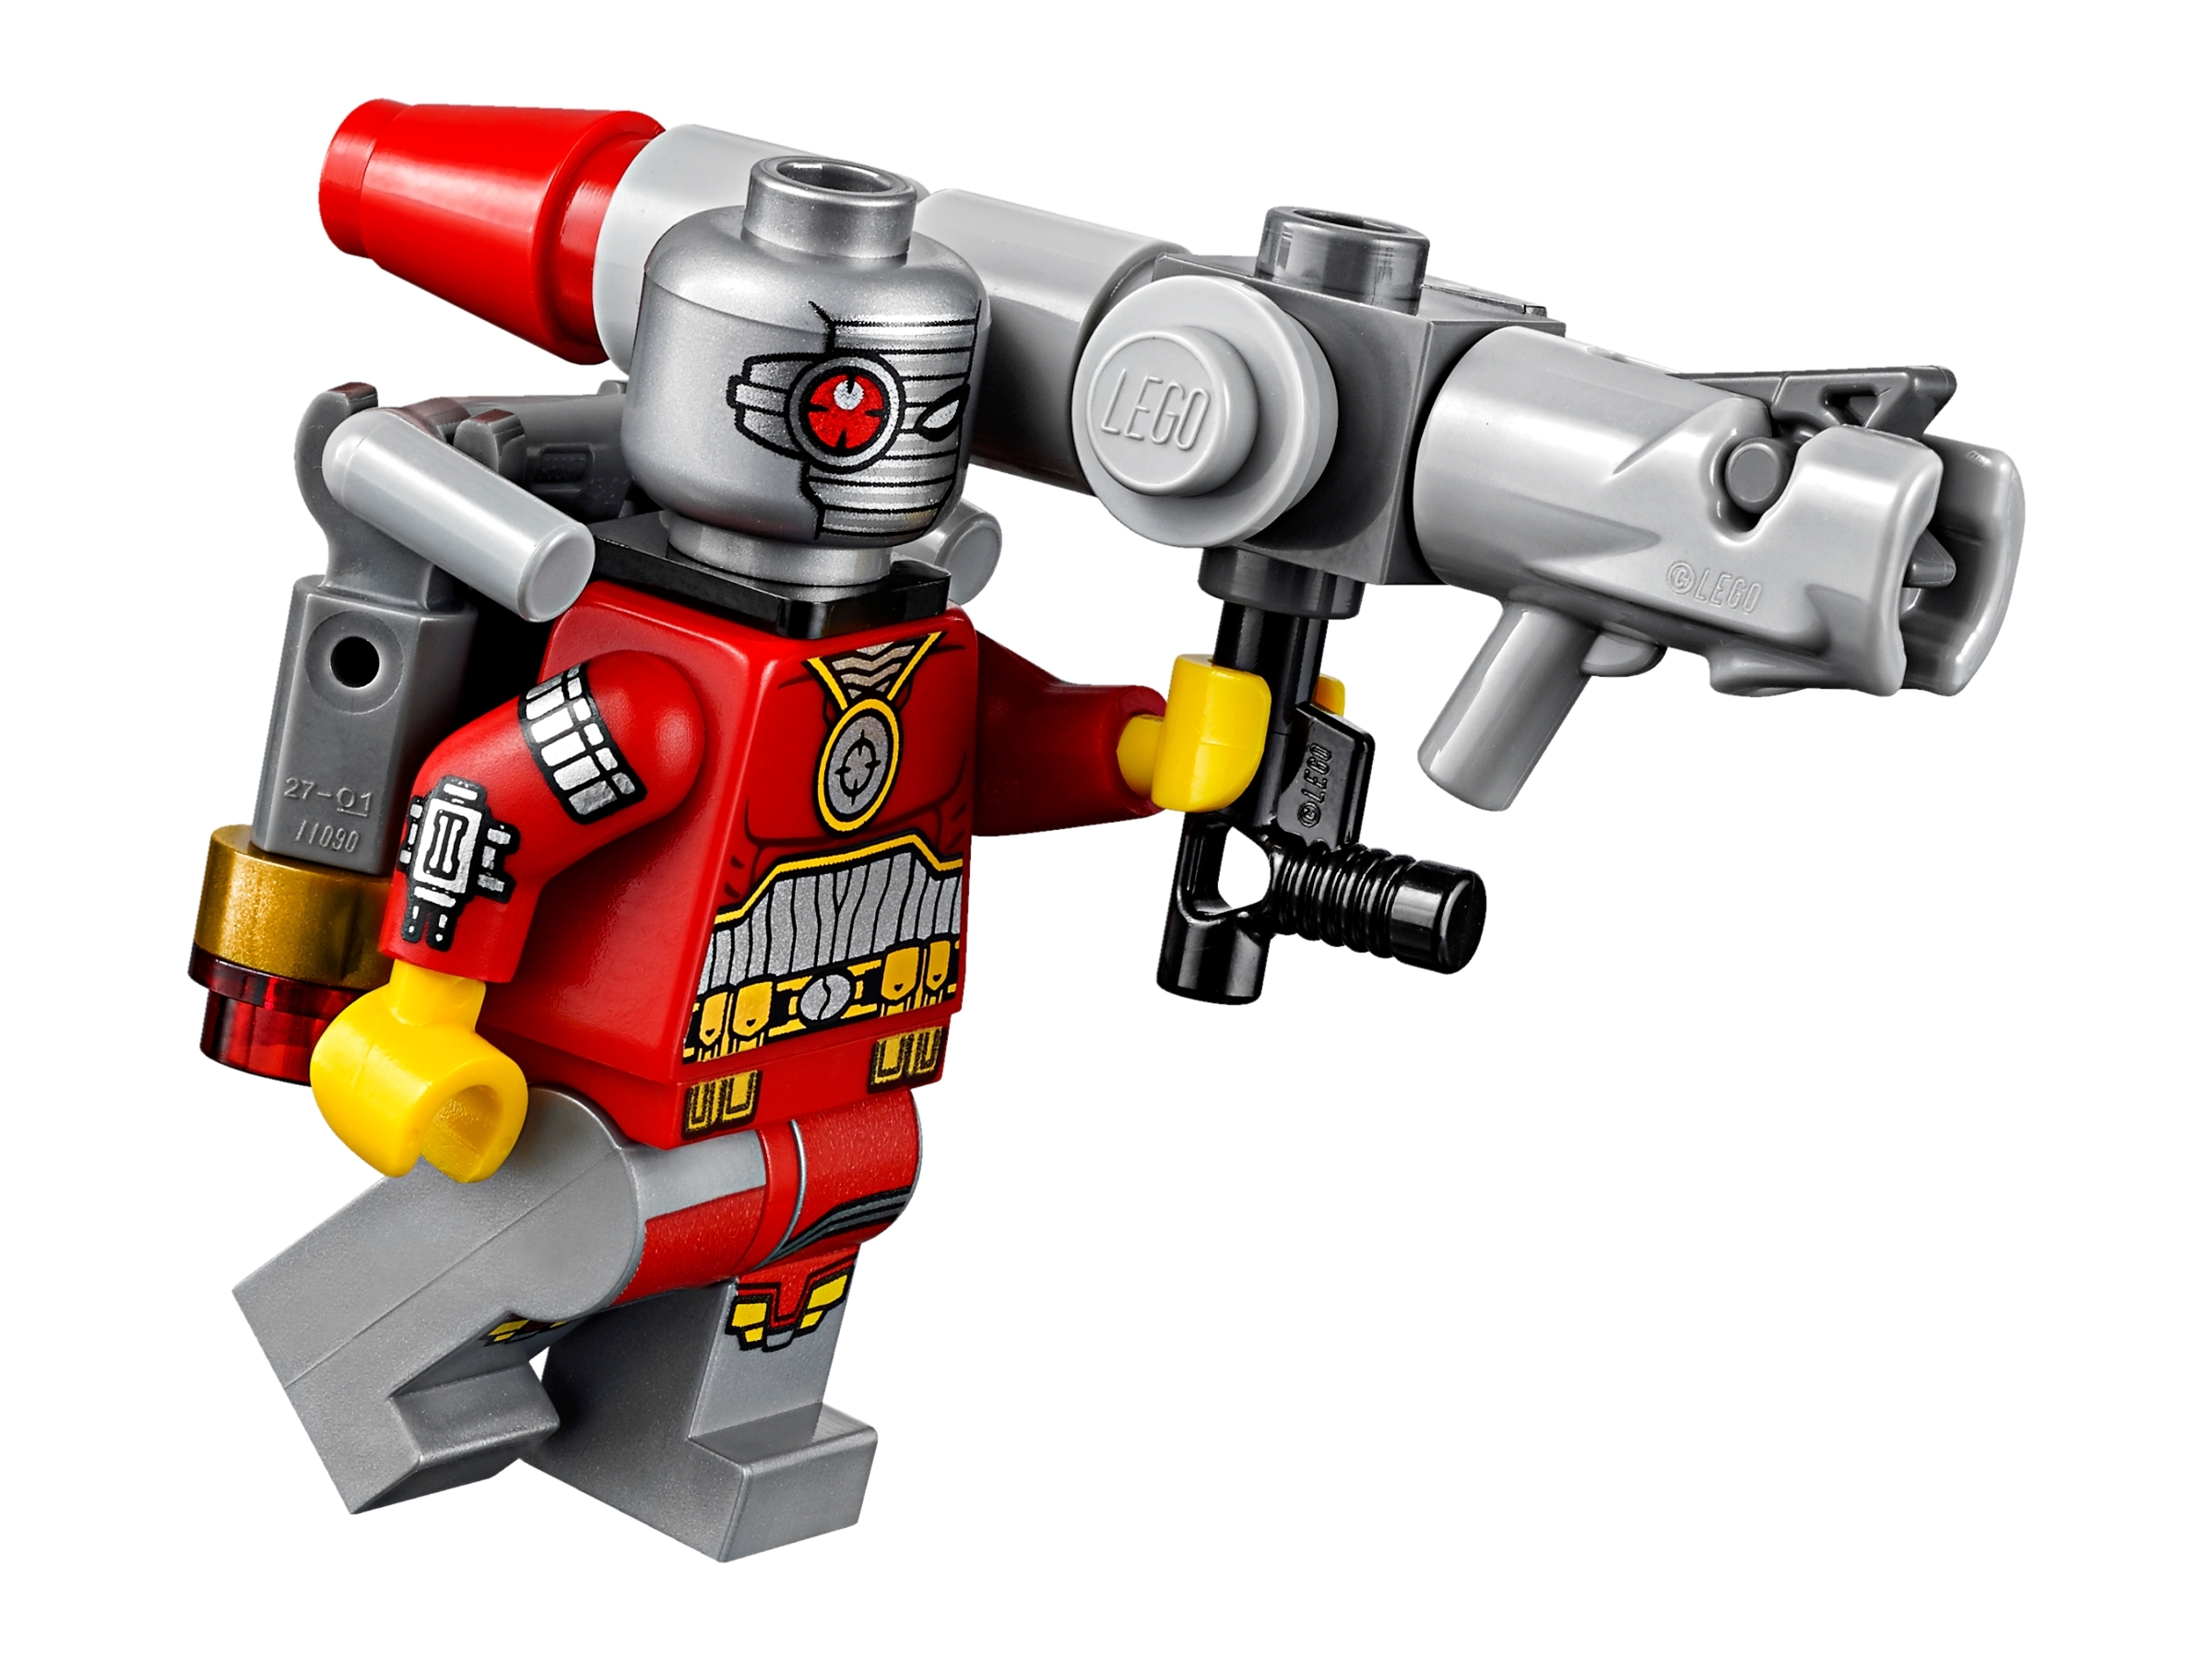 LEGO DC Superheroes Batman Deadshot Minifigure with Weapon from 76053 